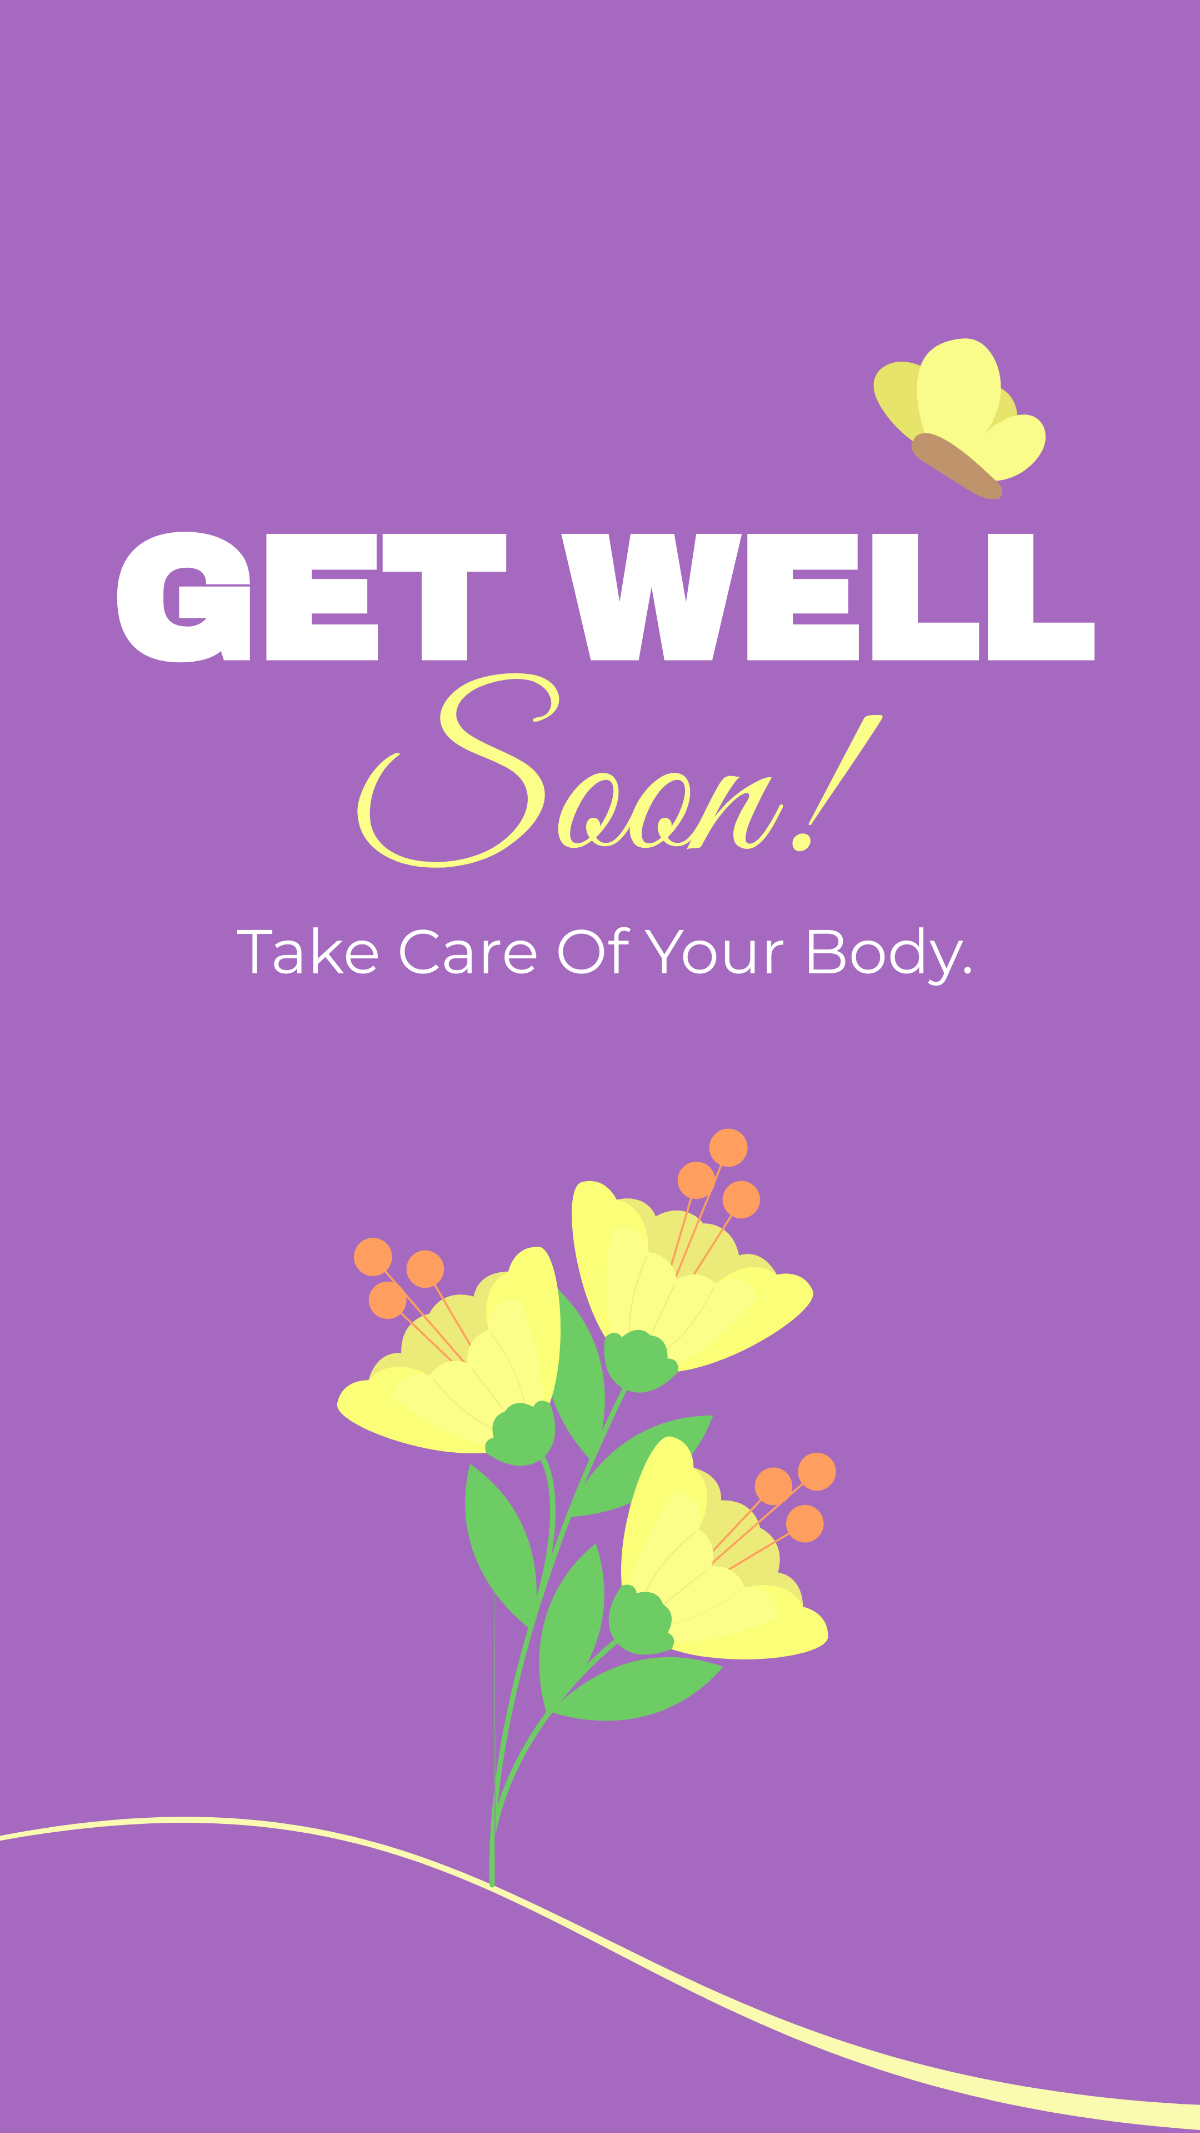 Get Well Soon Poster Template